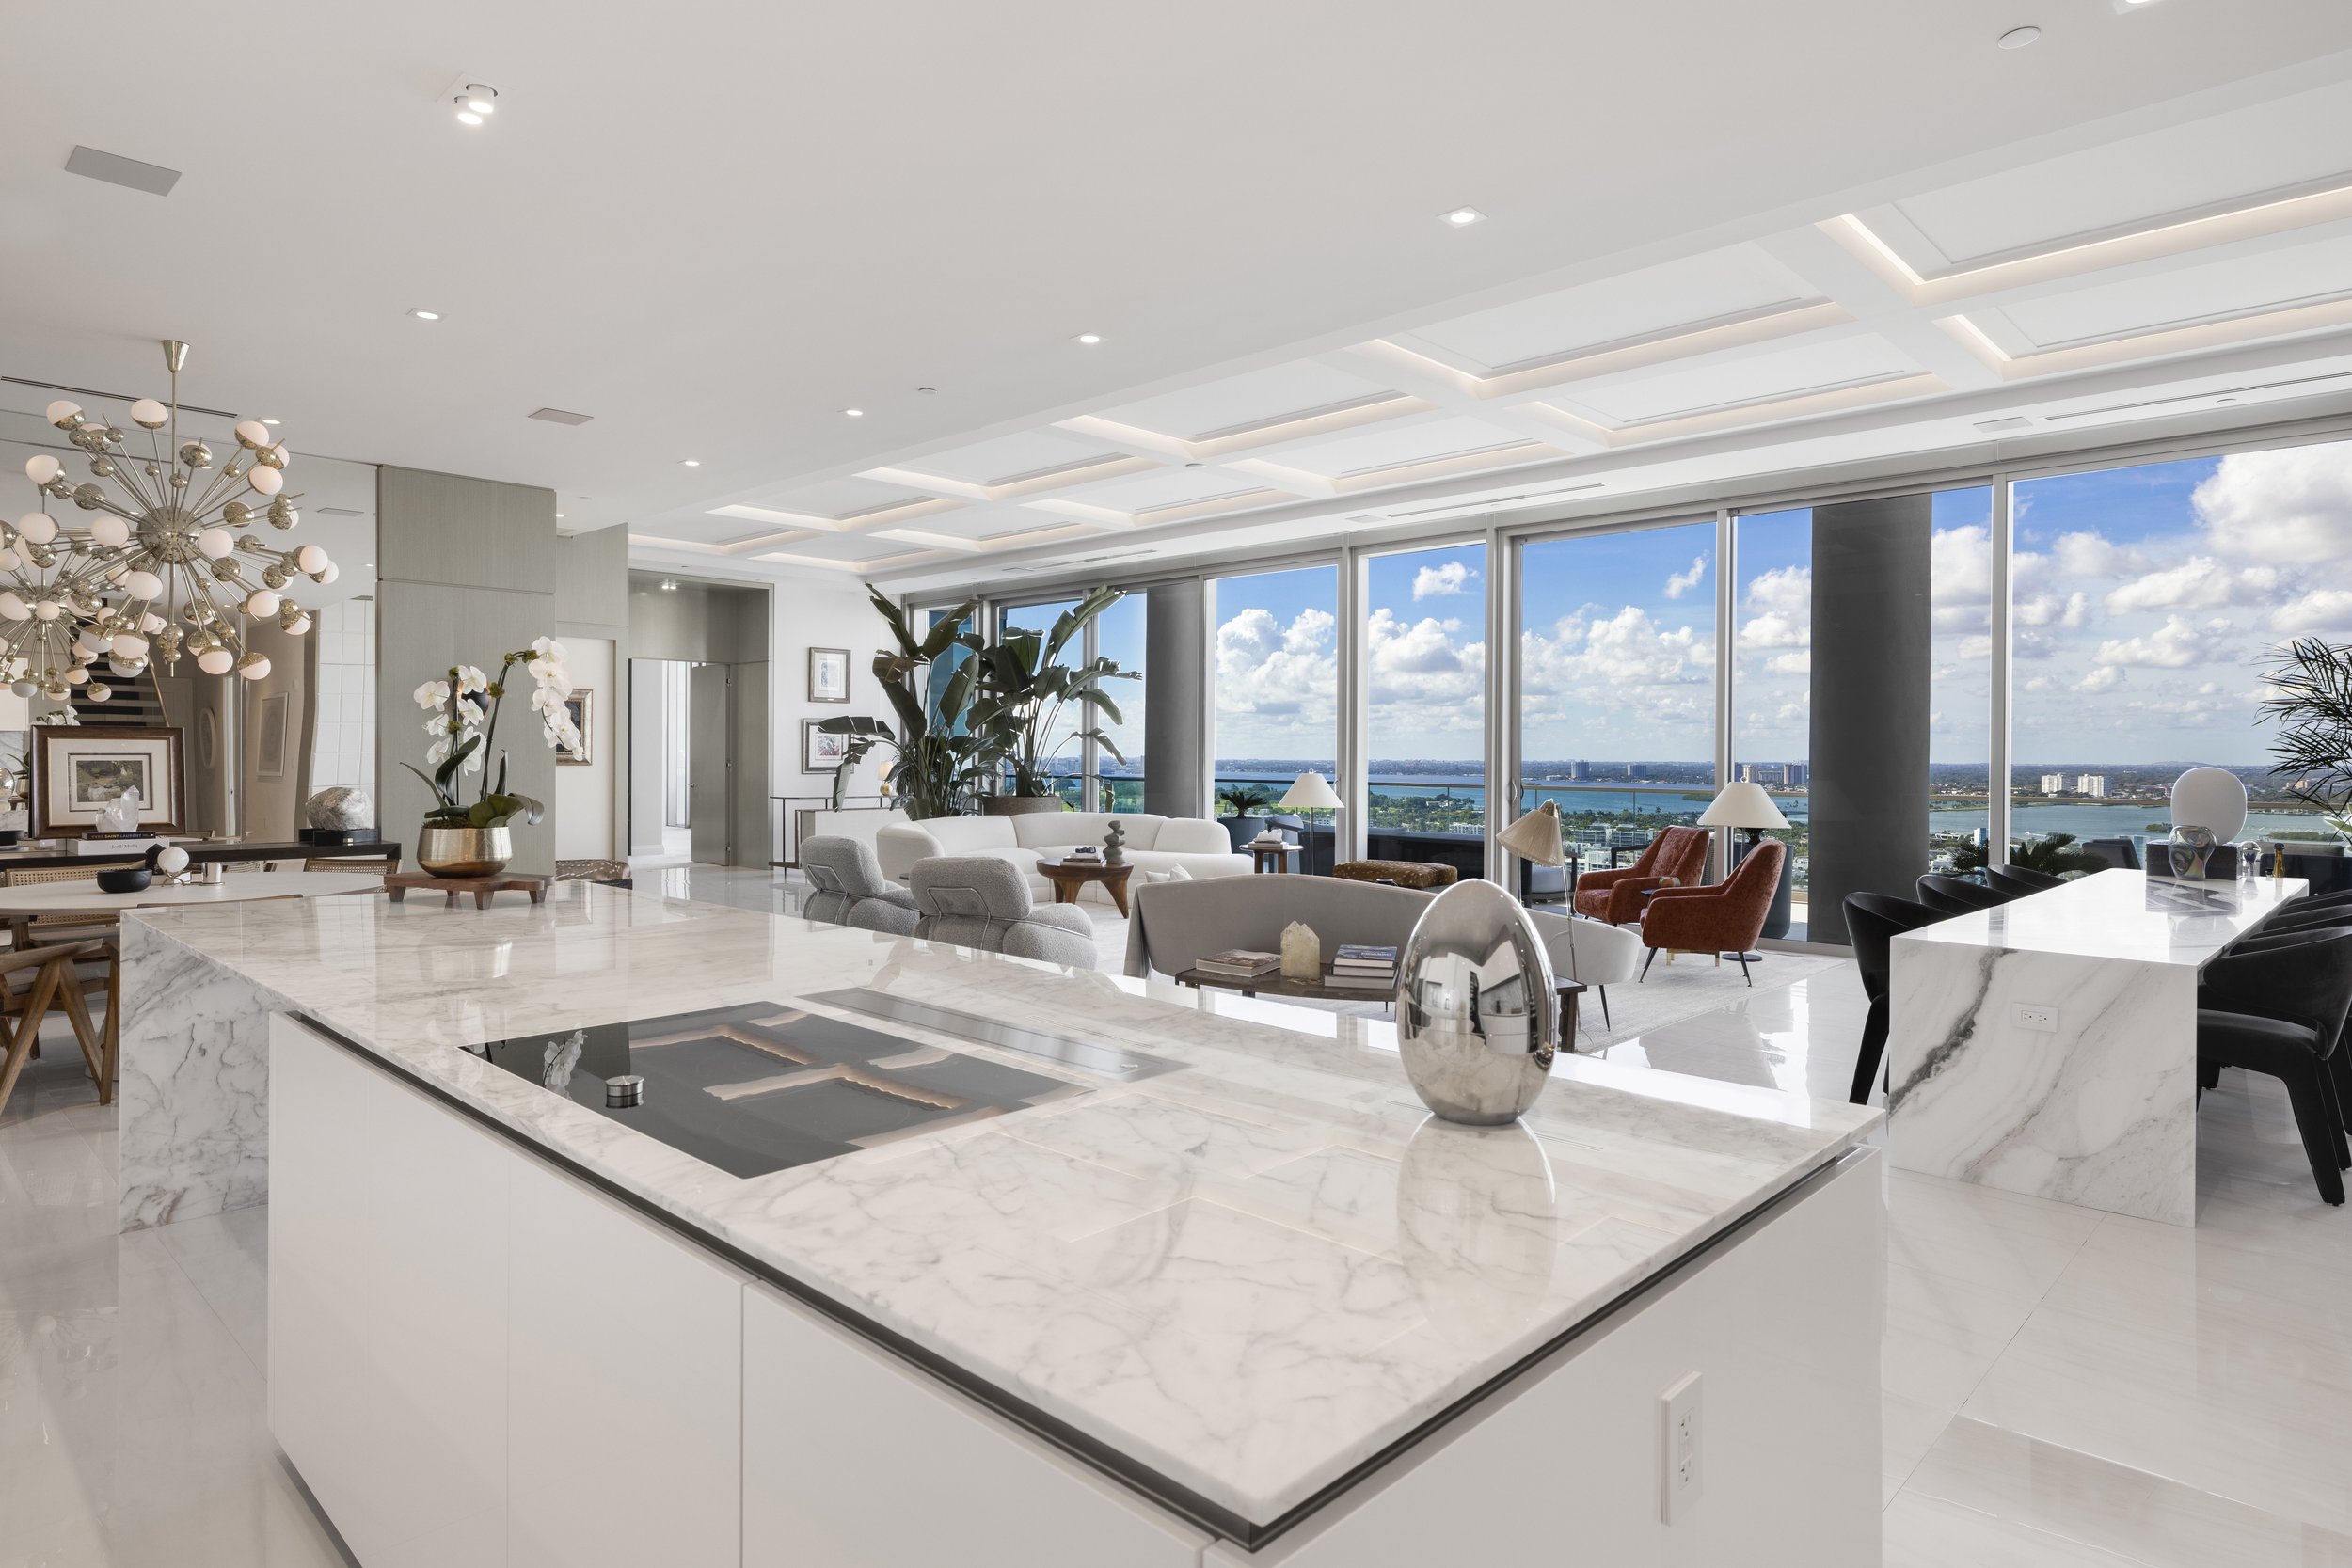 Step Inside This Two-Story Crown Jewel Penthouse At Oceana Bal Harbour Asking $25 Million 213.jpg